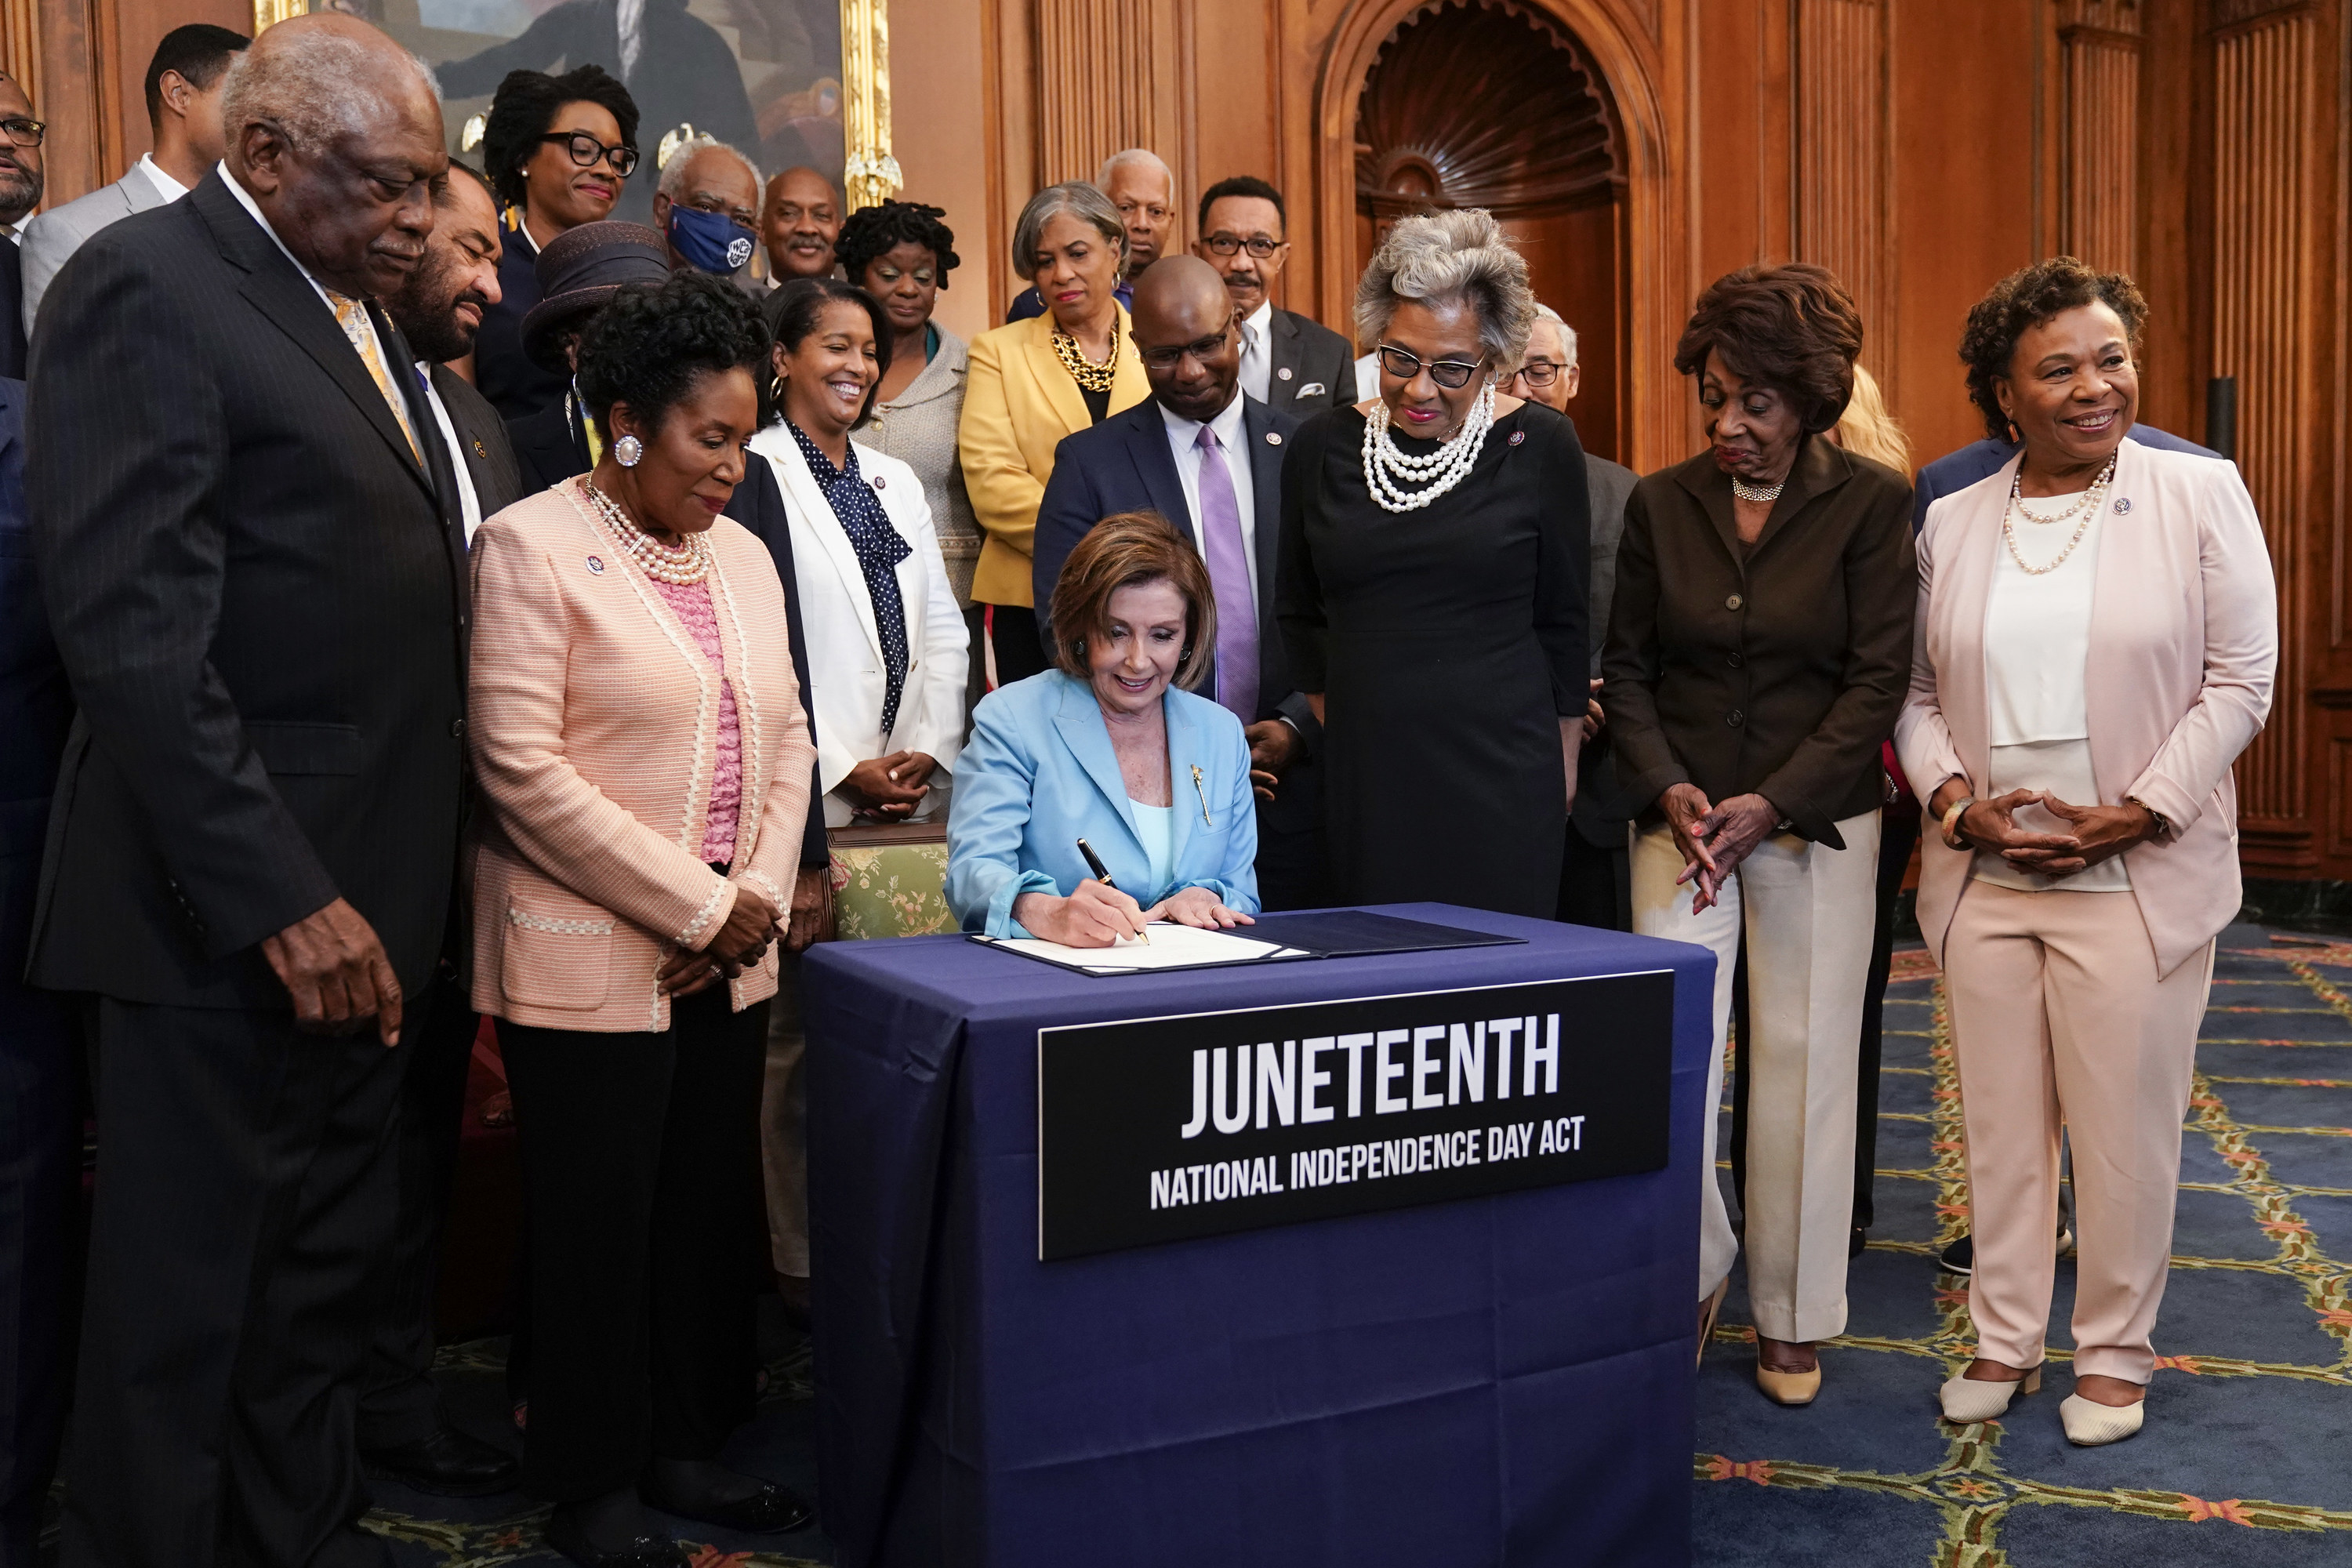 Speaker of the House Nancy Pelosi (D-CA) holds a bill enrollment signing ceremony for the Juneteenth National Independence Day